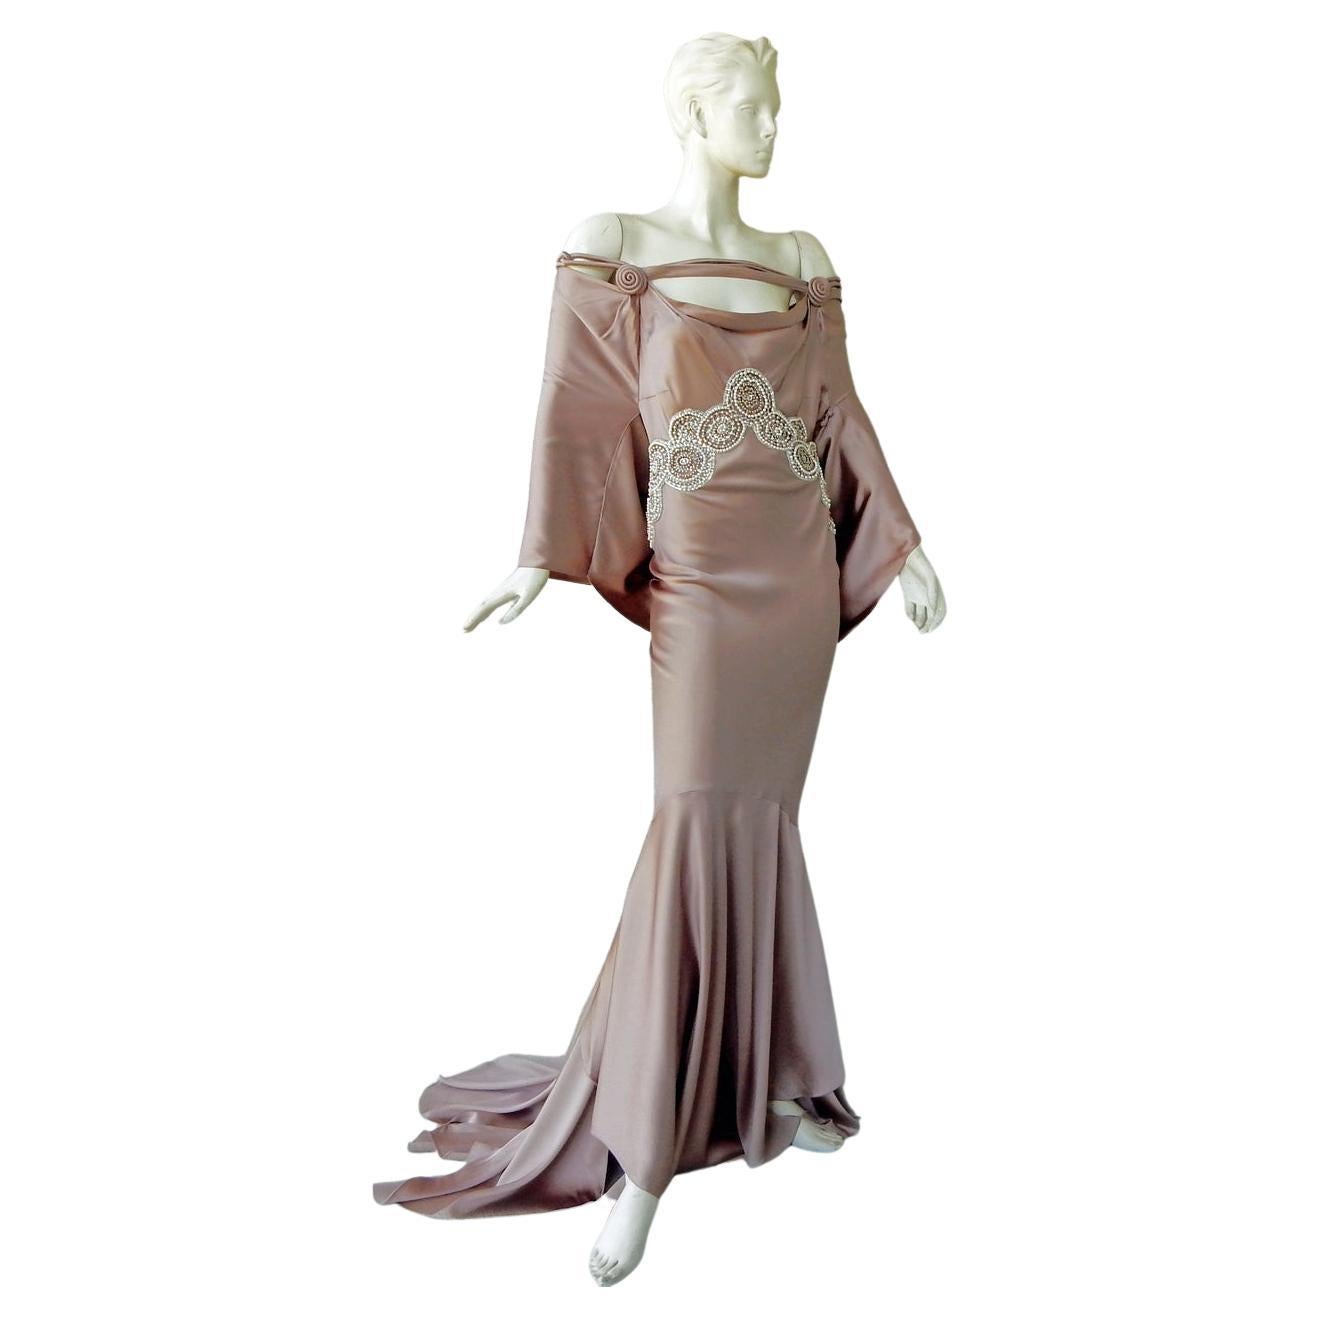 John Galliano Deco Inspired High Style Gown For Sale